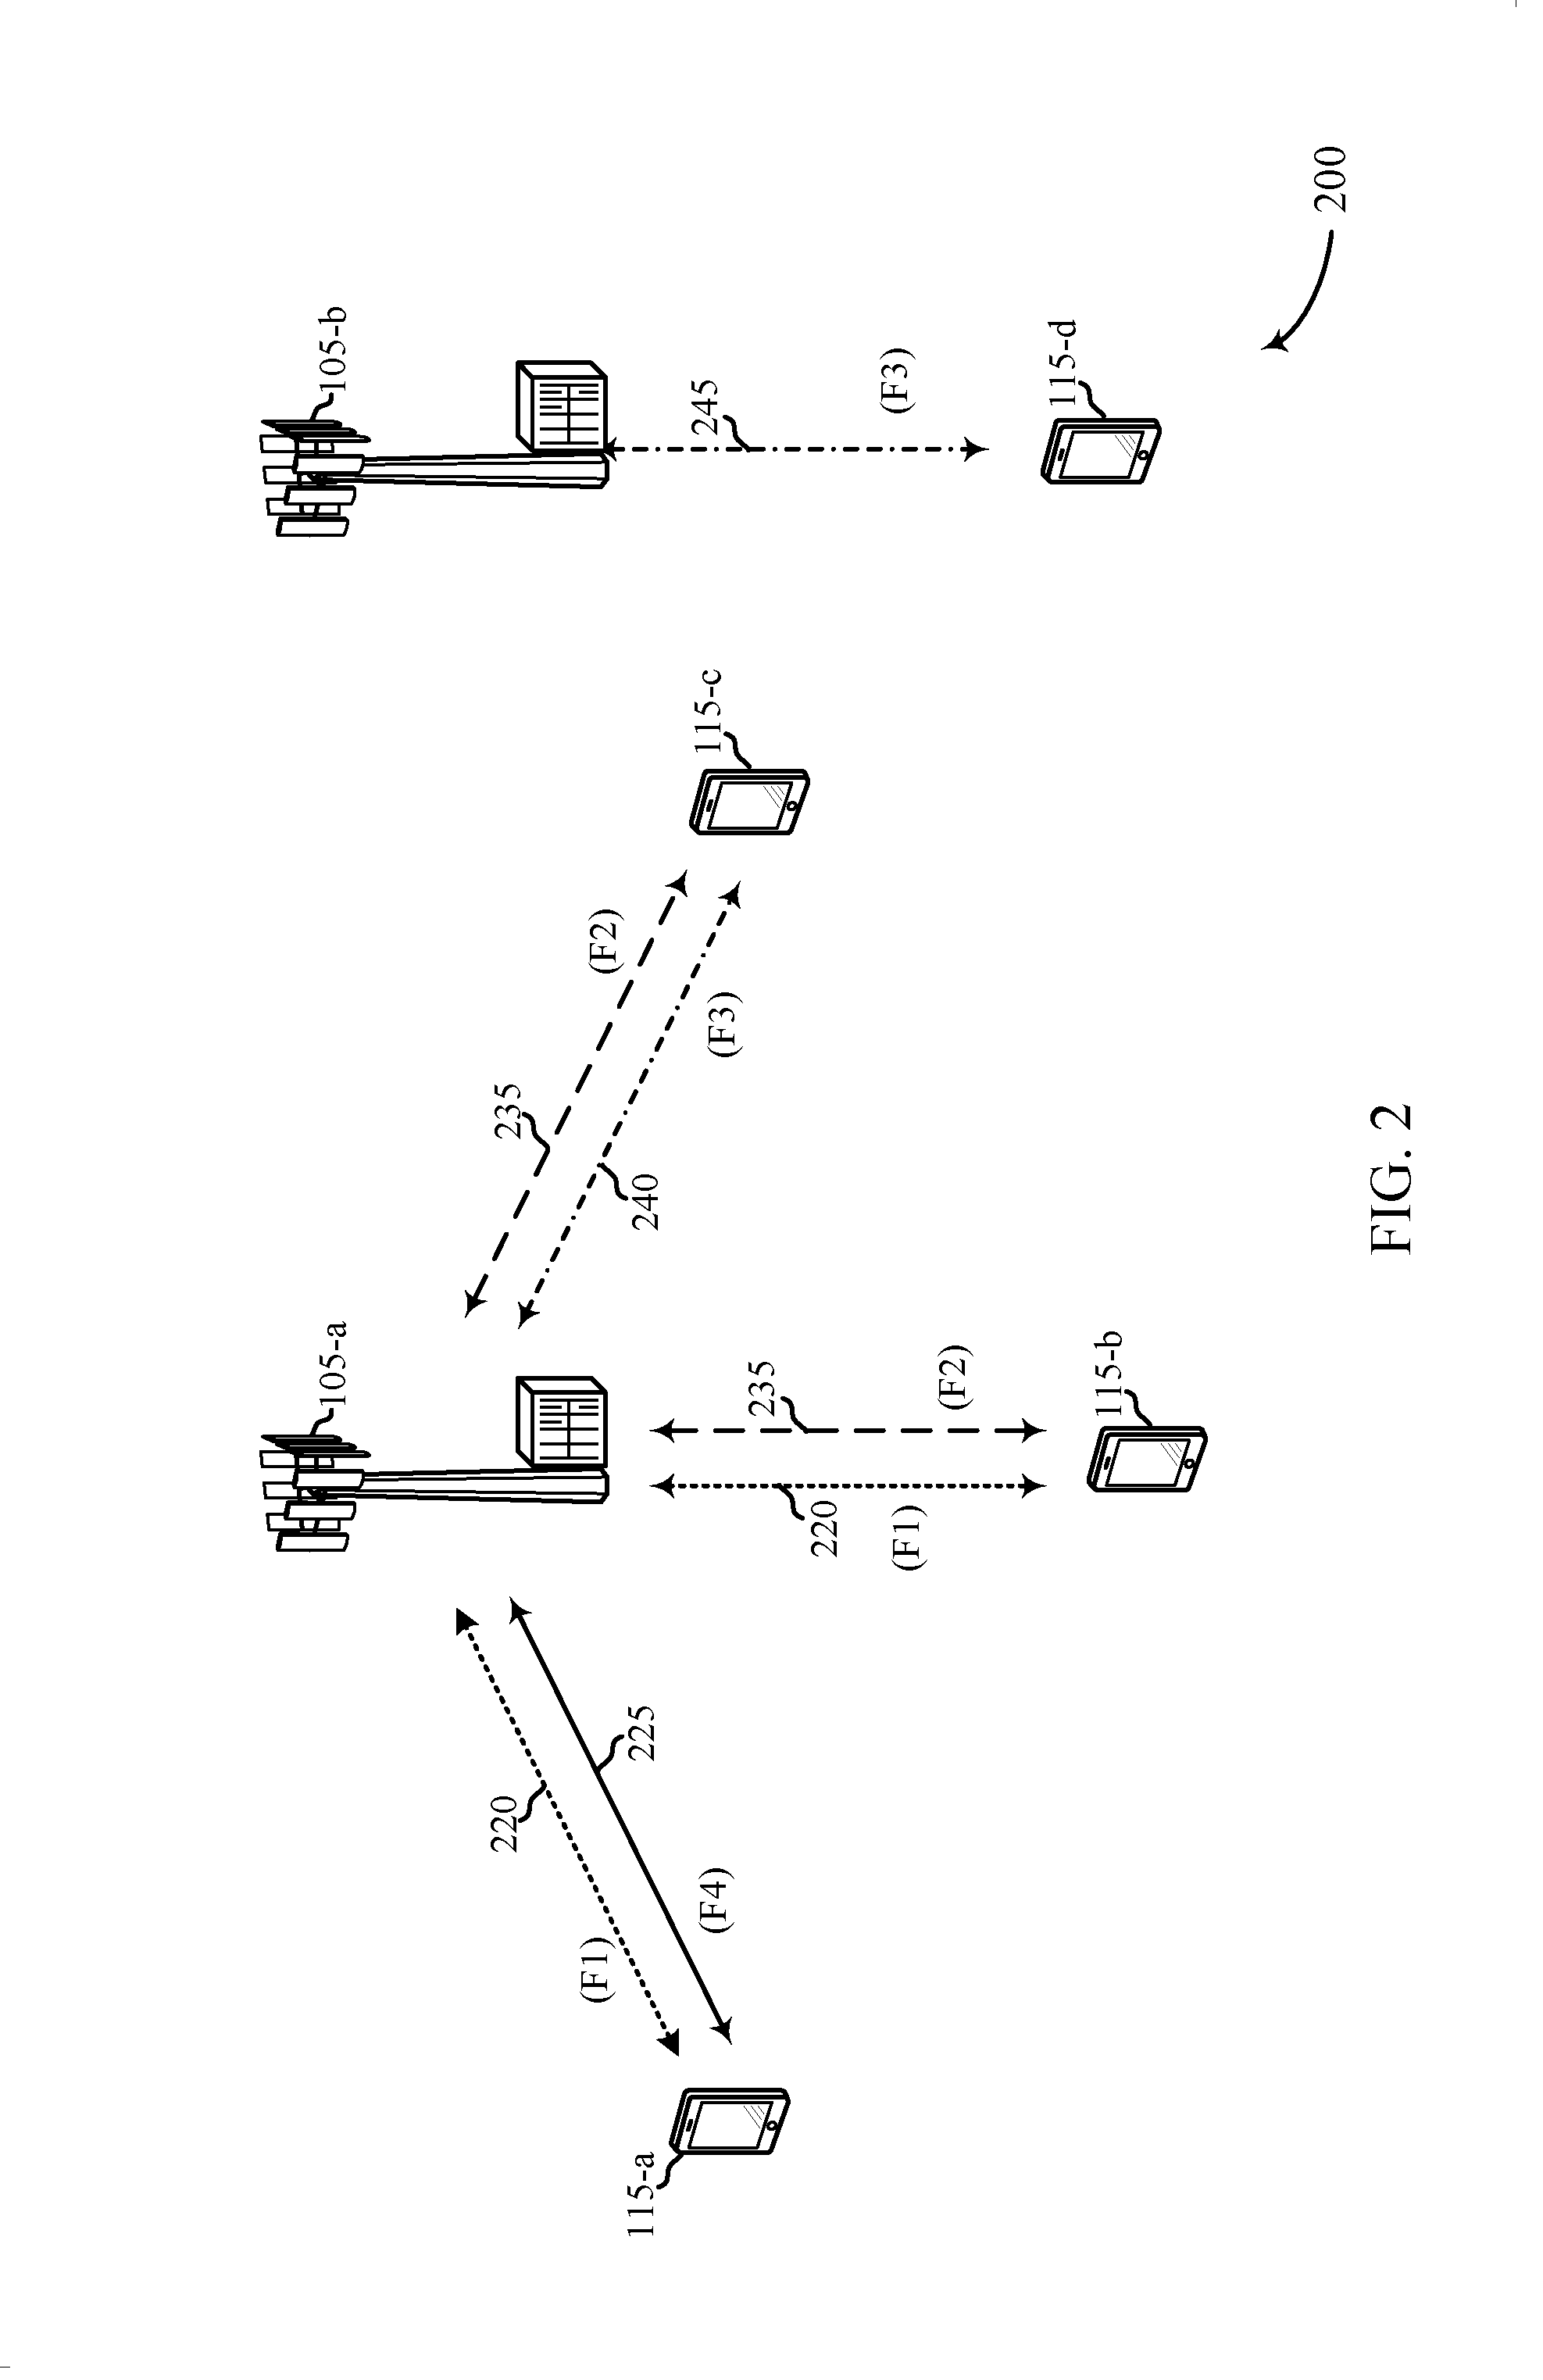 Techniques for transmitting on multiple carriers of a shared radio frequency spectrum band